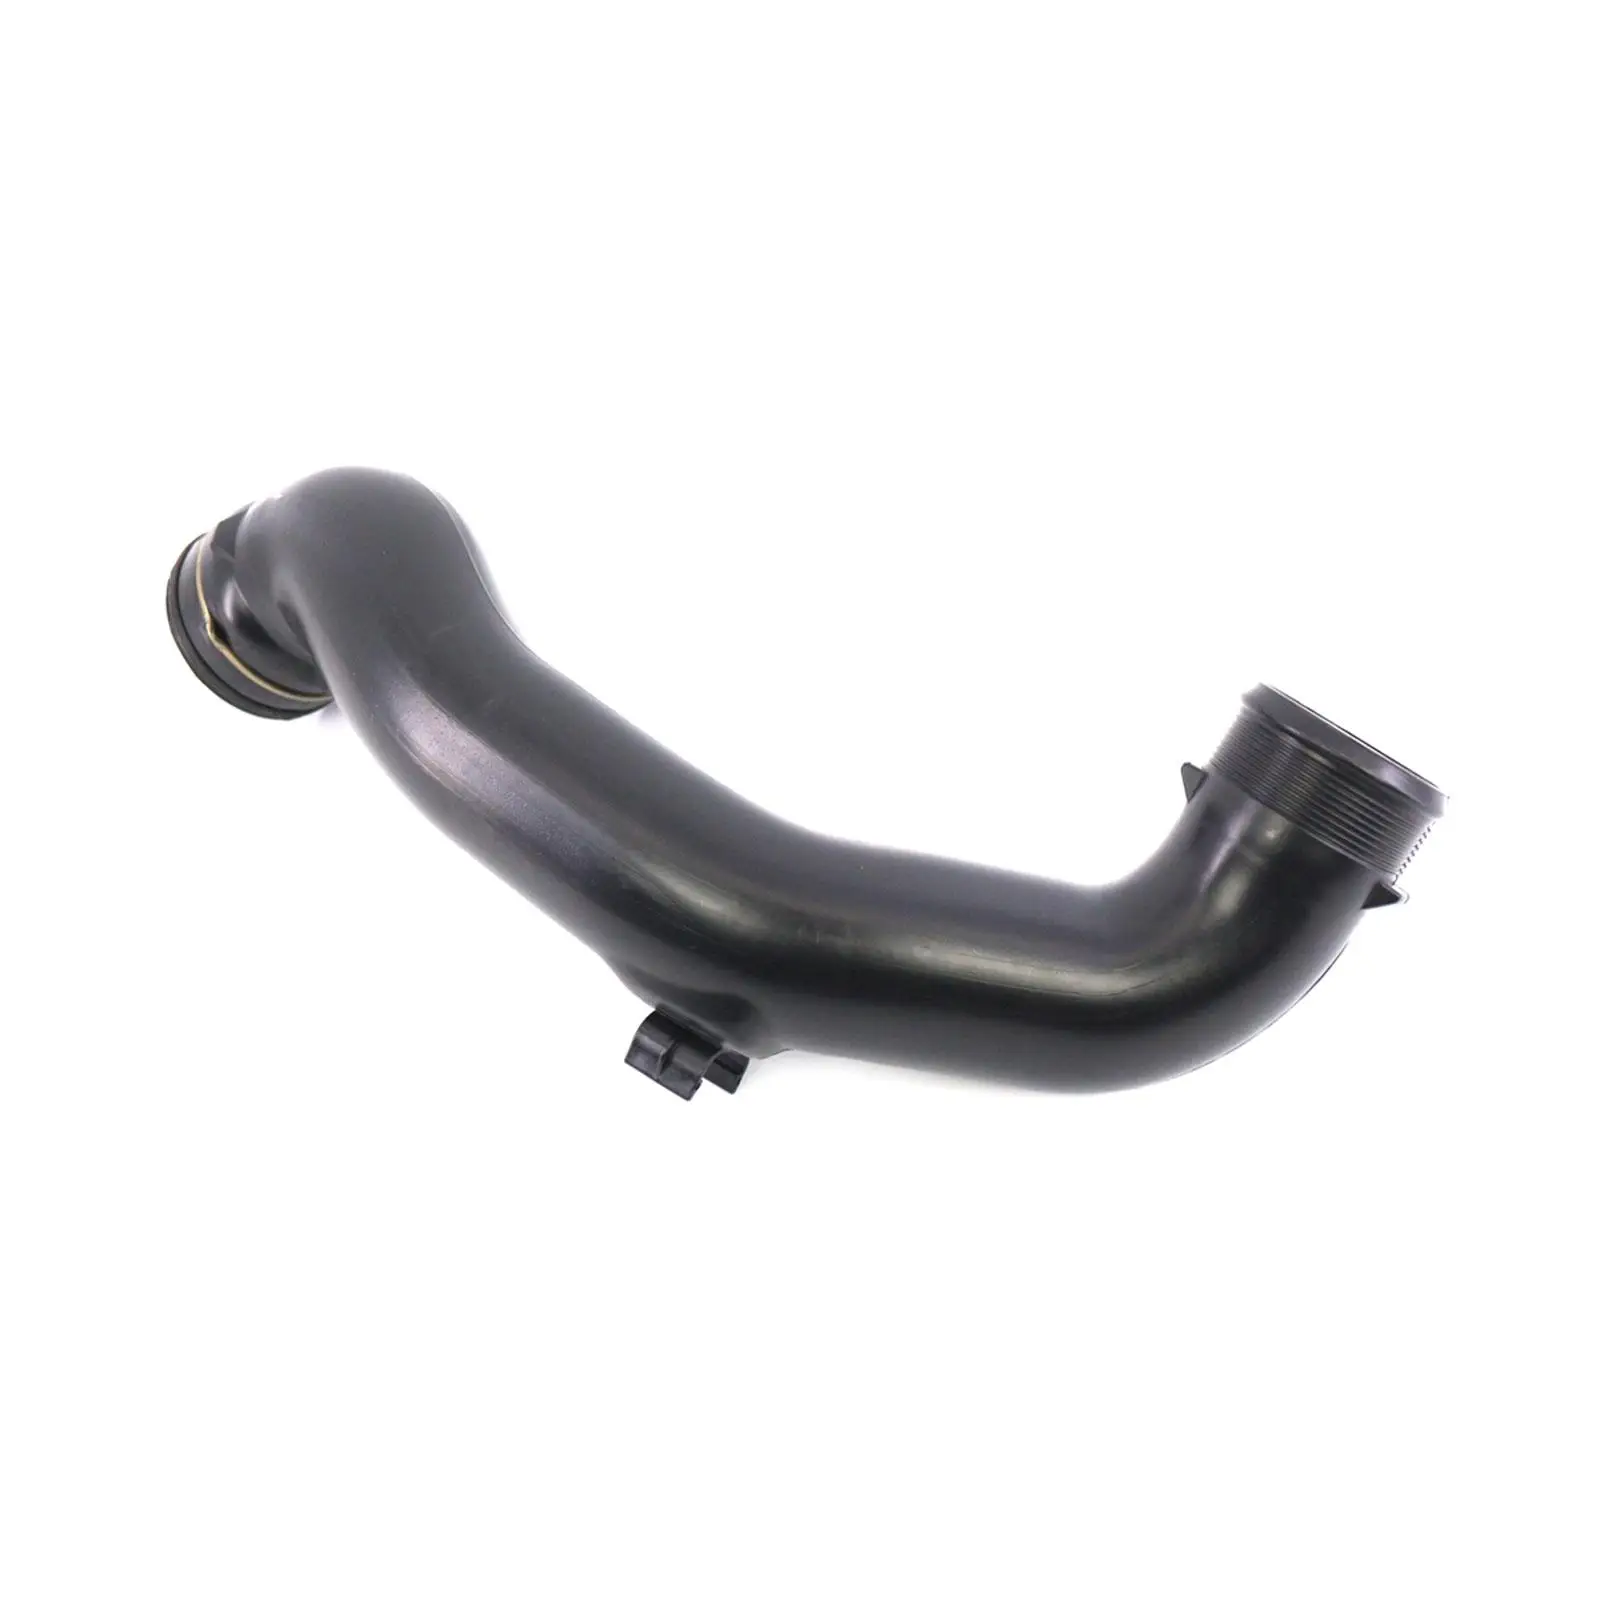 Intake Charge Tube Turbo Hose Charge Air Induction Tract for BMW x5 E70 Lci